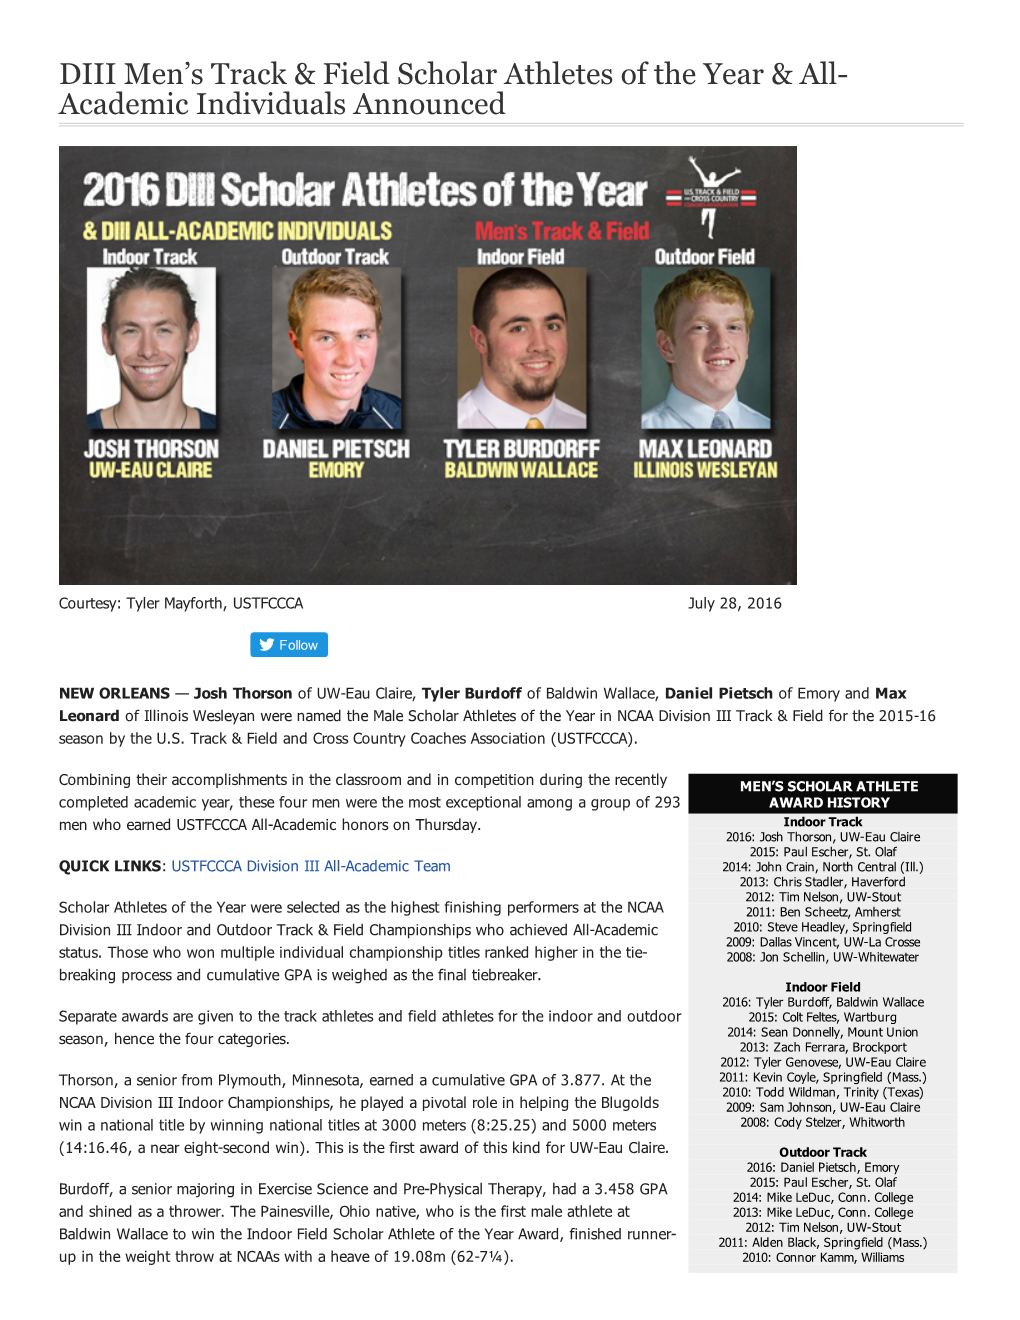 DIII Men's Track & Field Scholar Athletes of the Year & All Academic Individuals Announced